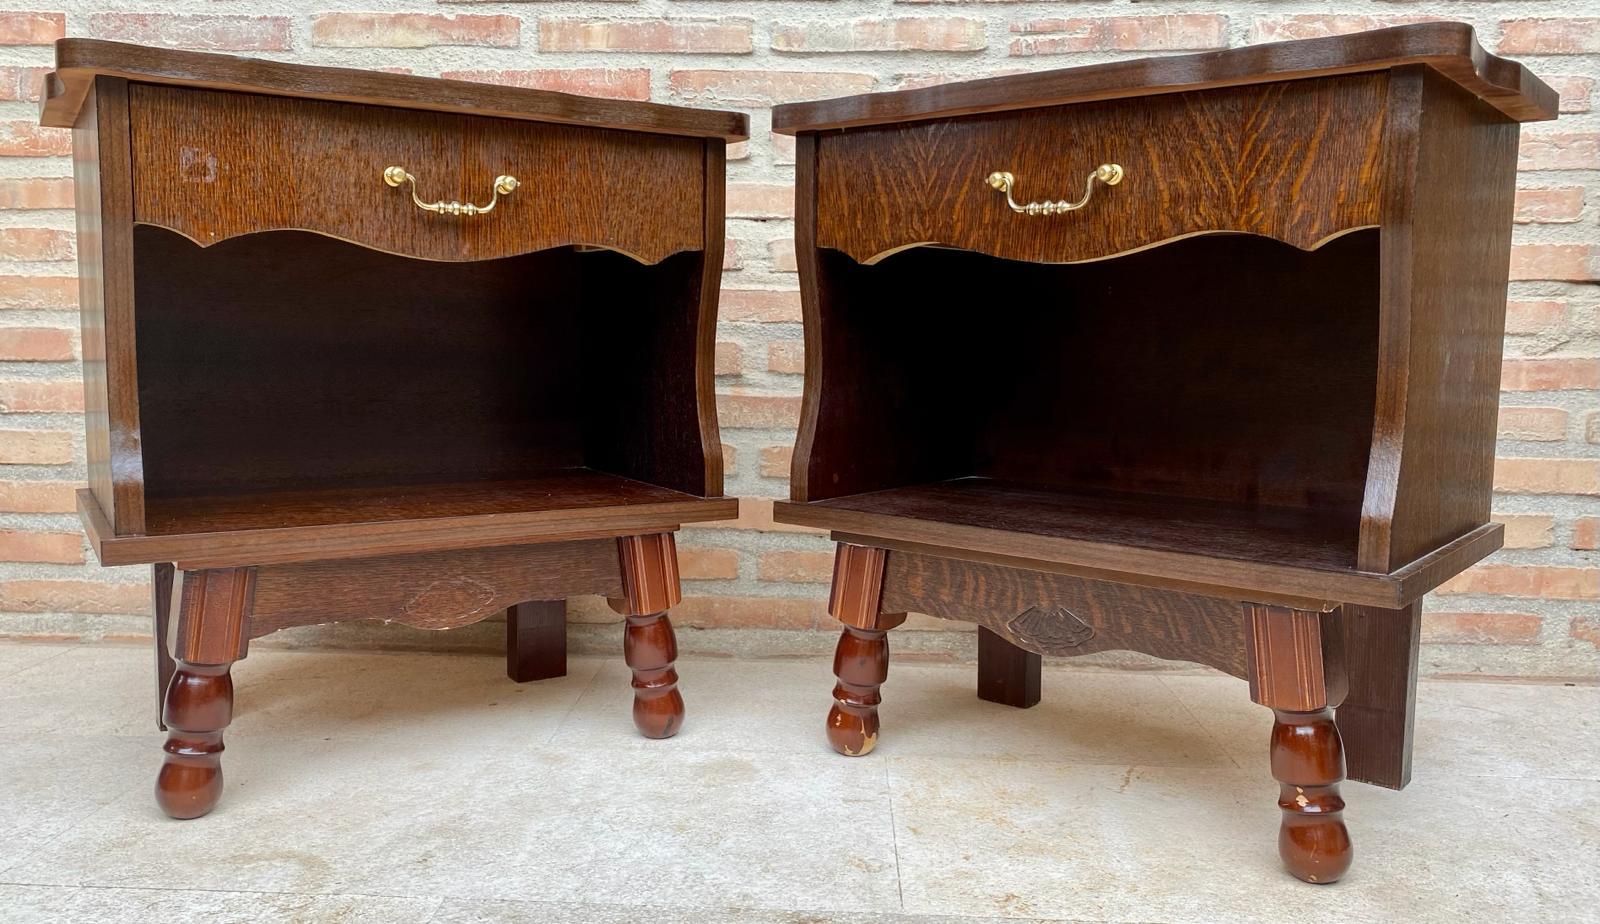 Circa 1960's Pair of Nightstands, Mid-Century Vintage Retro Nightstands.
solid wood legs
Original fittings made of brass.
A drawer with its brass handle and a low open shelf.
Interesting design of four different legs from each other.
Timelessly